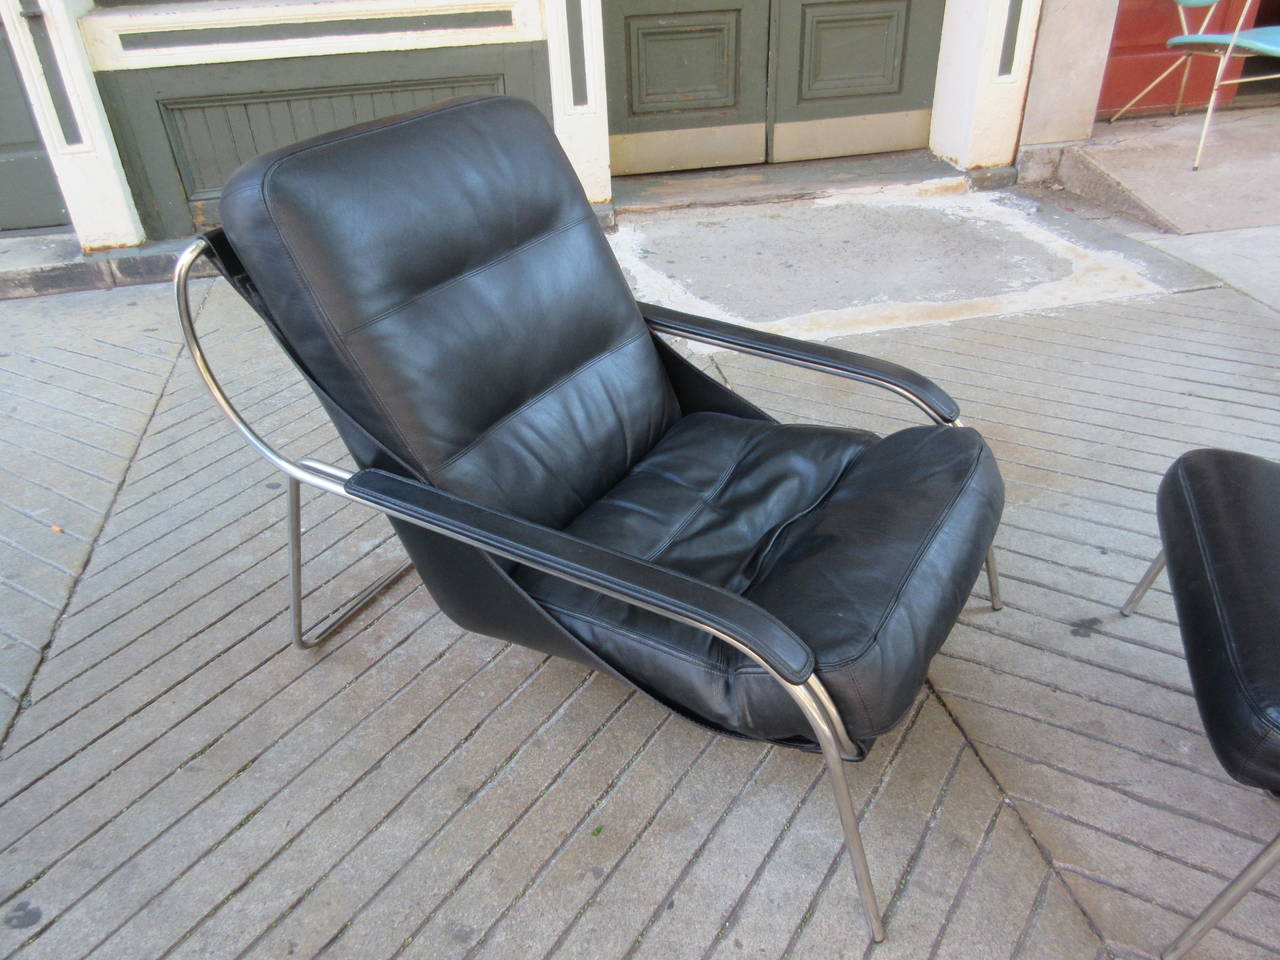 Maggiolina chair and ottoman by Zanotta designed by Marco Zanuso, 1947. Cowhide sling supports leather cushions. Stainless steel frame supports this very comfortable and sleek lounger! Ottoman measures roughly 26